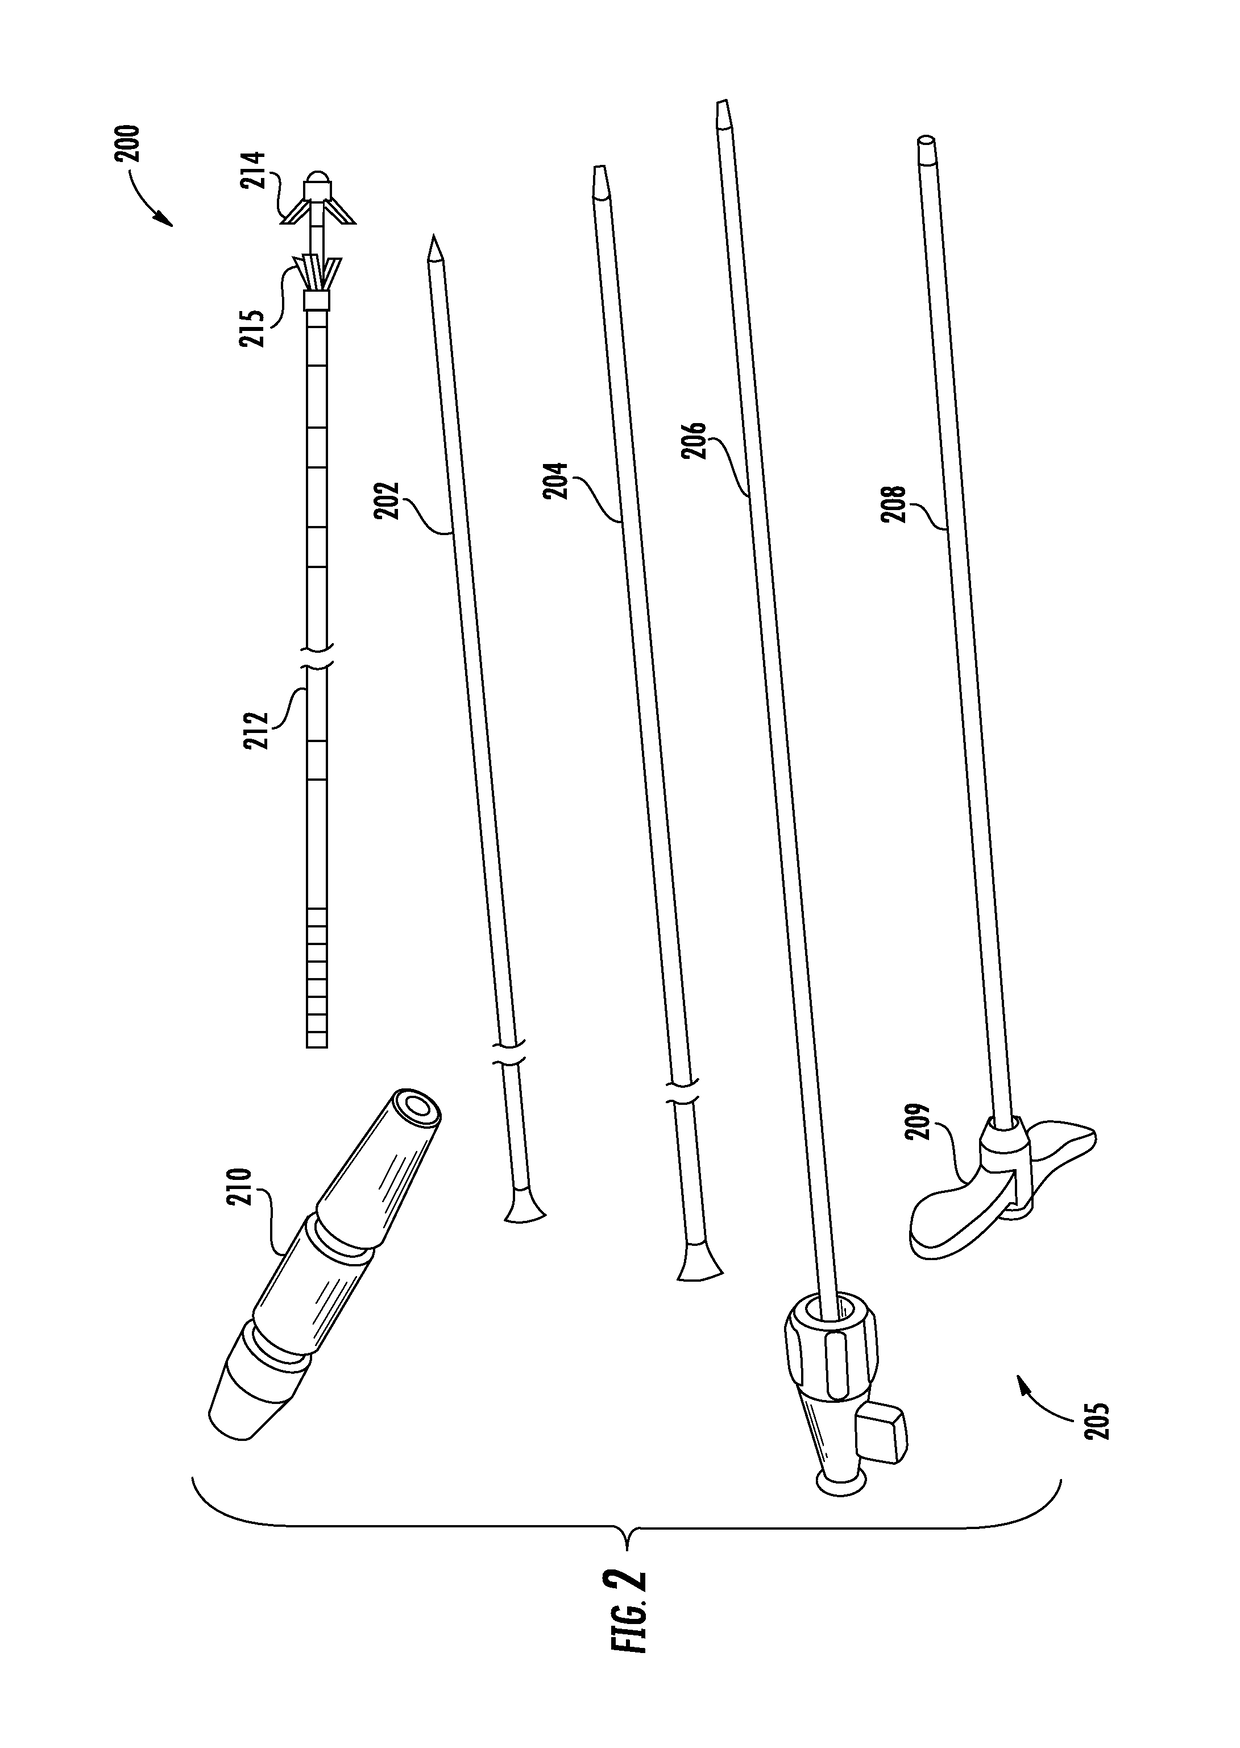 Systems and methods for enhanced implantation of electrode leads between tissue layers